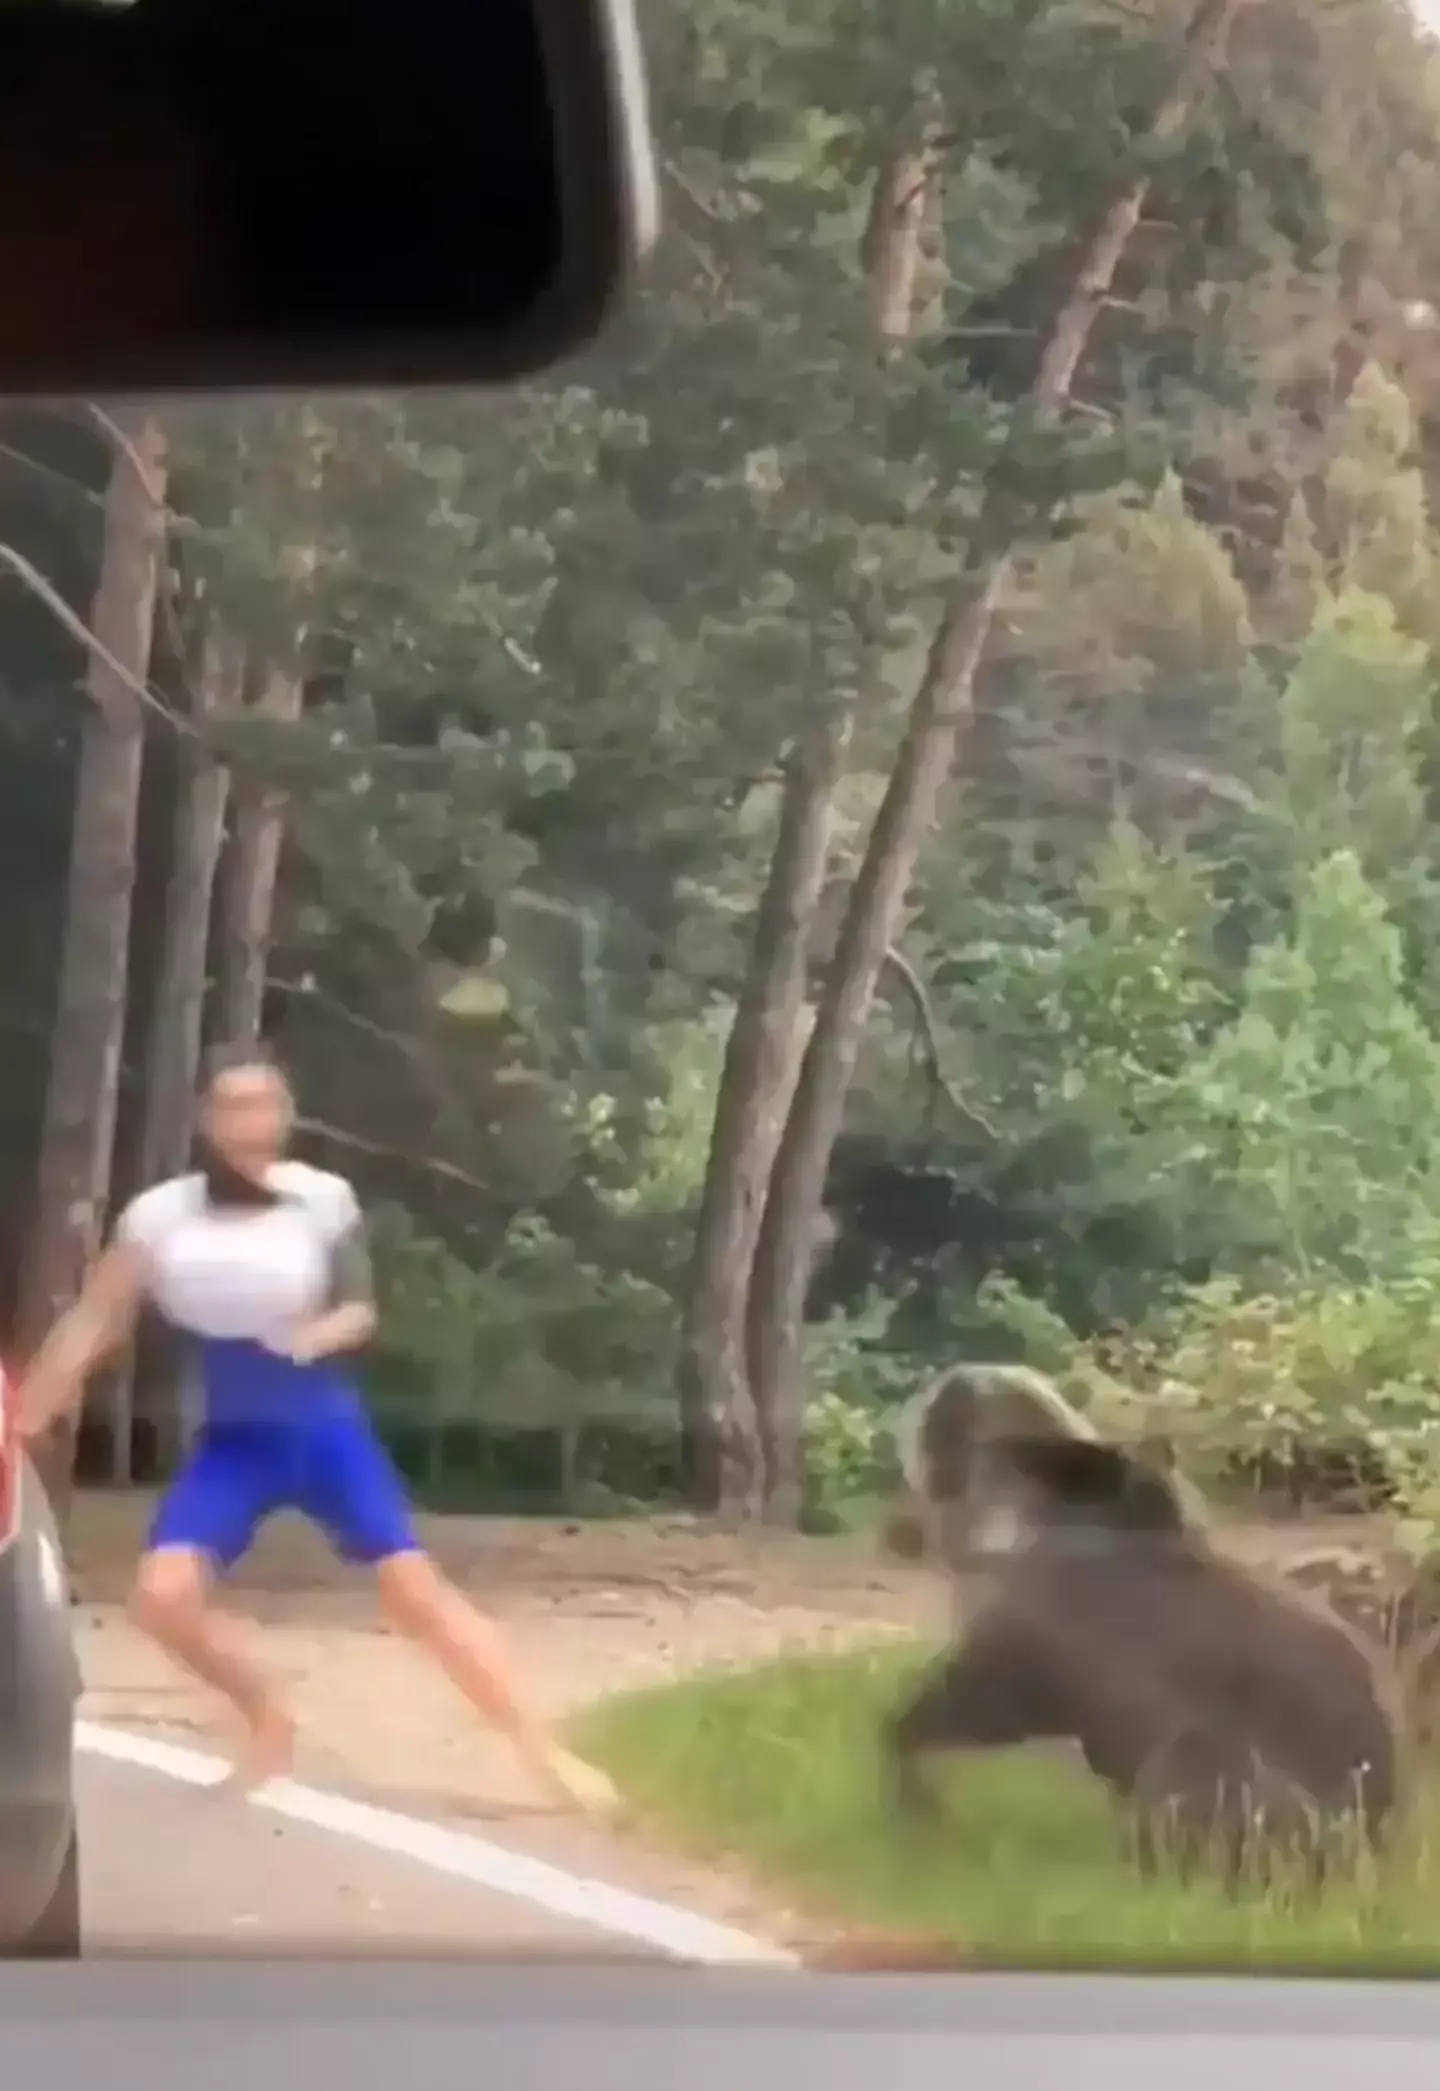 Back in August, a wild bear was seen lunging at a tourist trying to take photos with it in Romania.